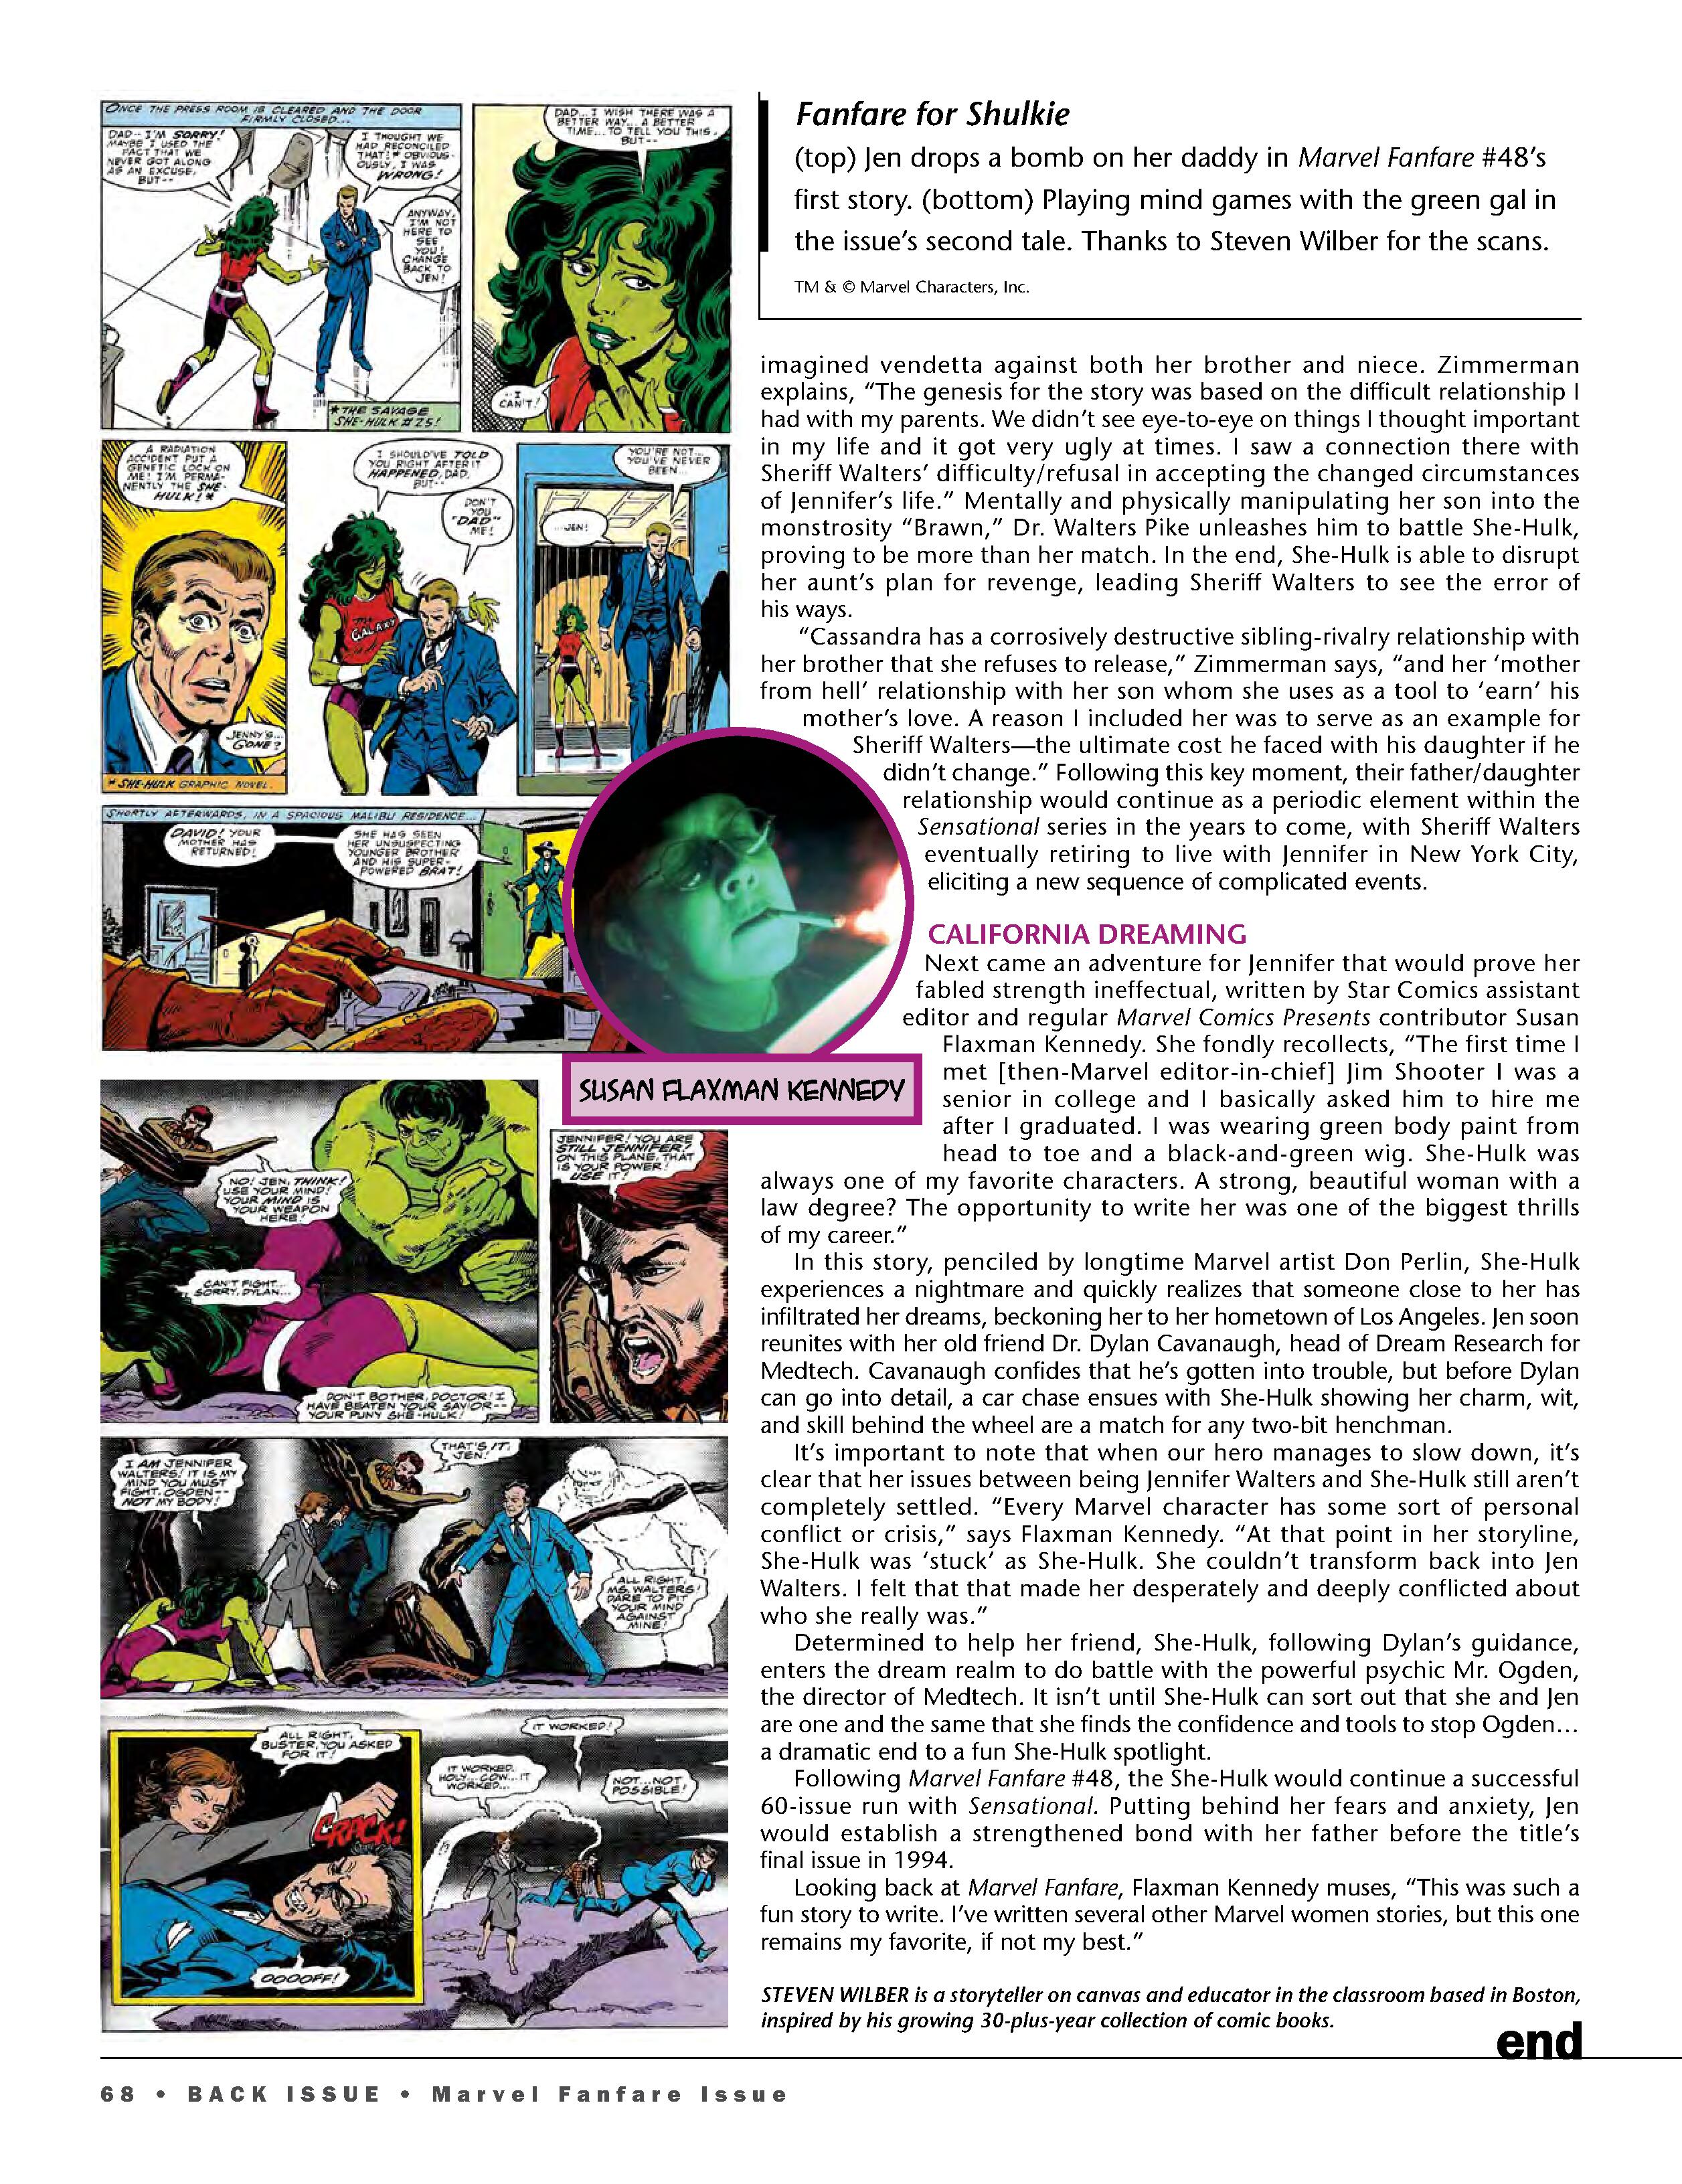 Read online Back Issue comic -  Issue #96 - 70